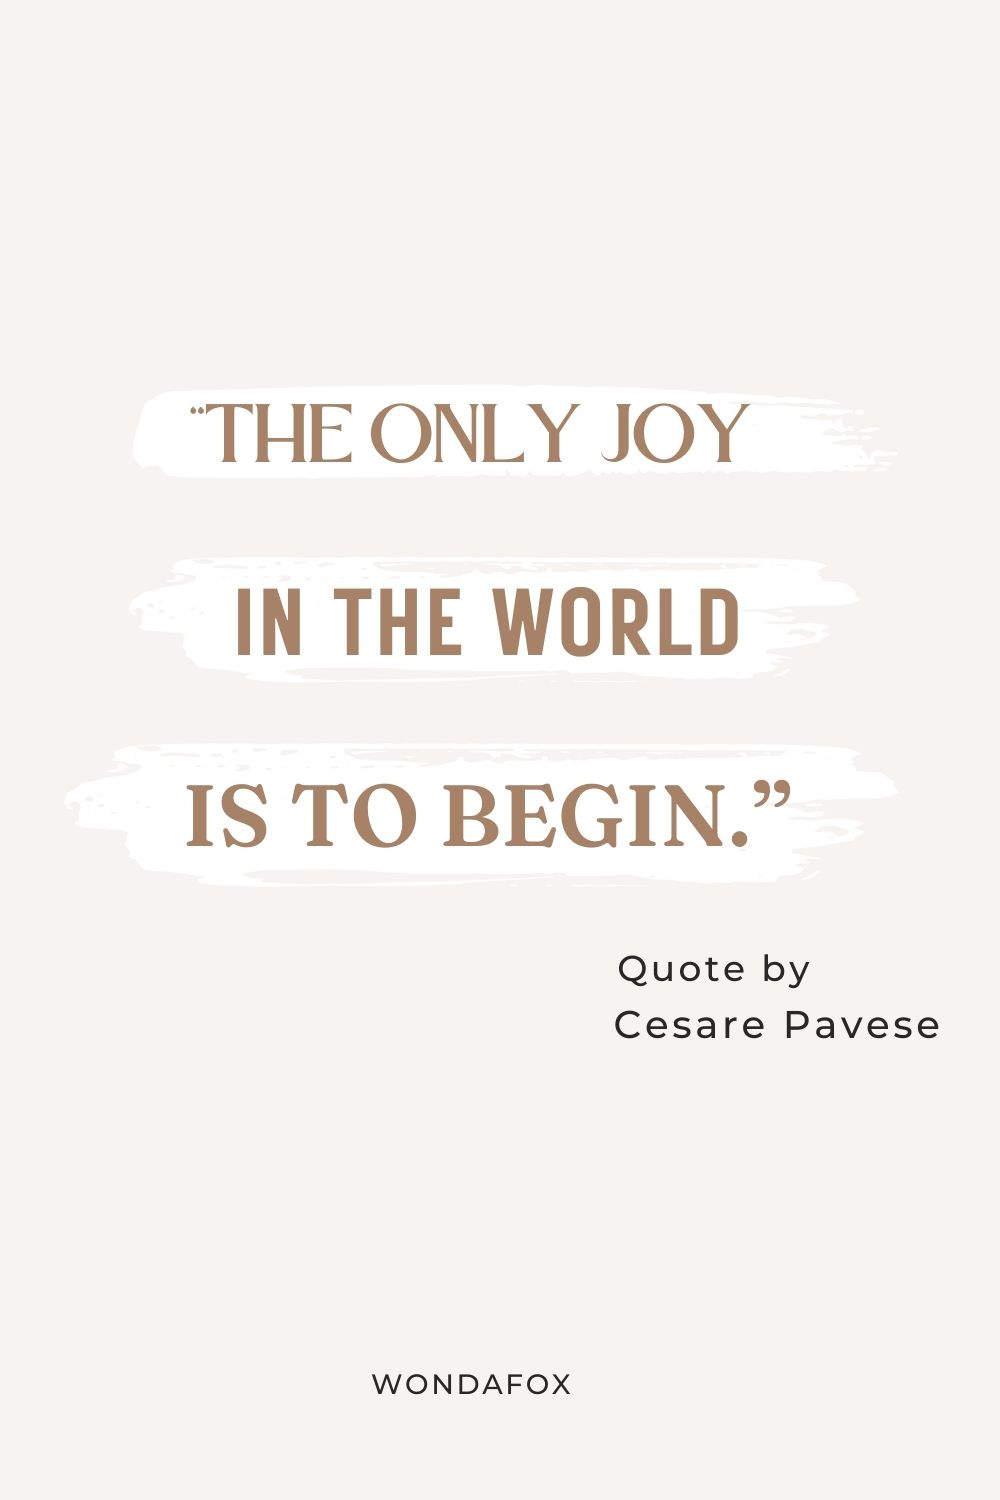 “The only joy in the world is to begin.”
Cesare Pavese